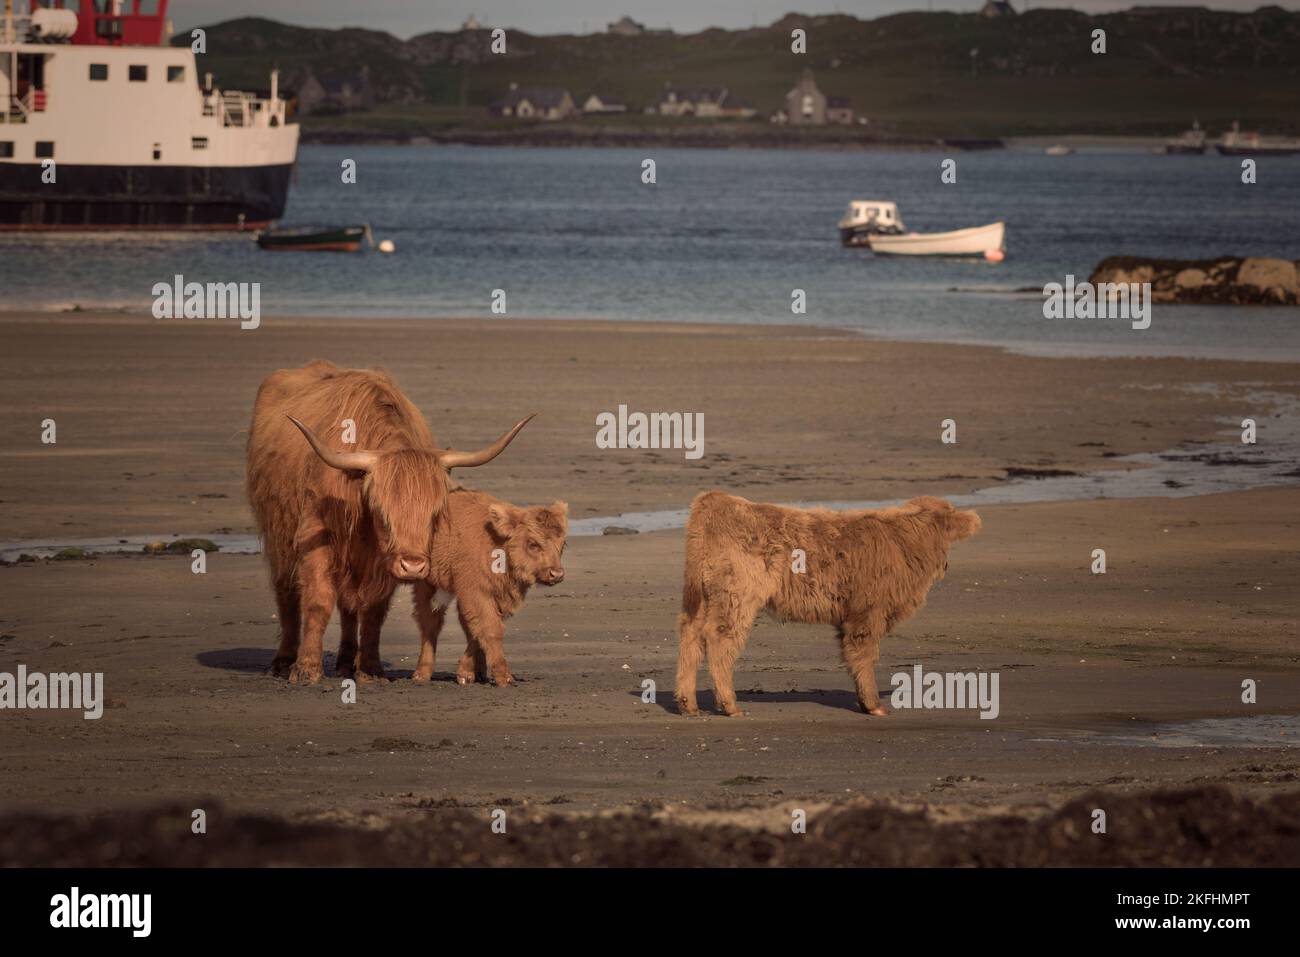 Highland cattle on the beach on the Isle of Mull Scotland by the ferry port for Iona. Ferry boat in the sea in the background Stock Photo